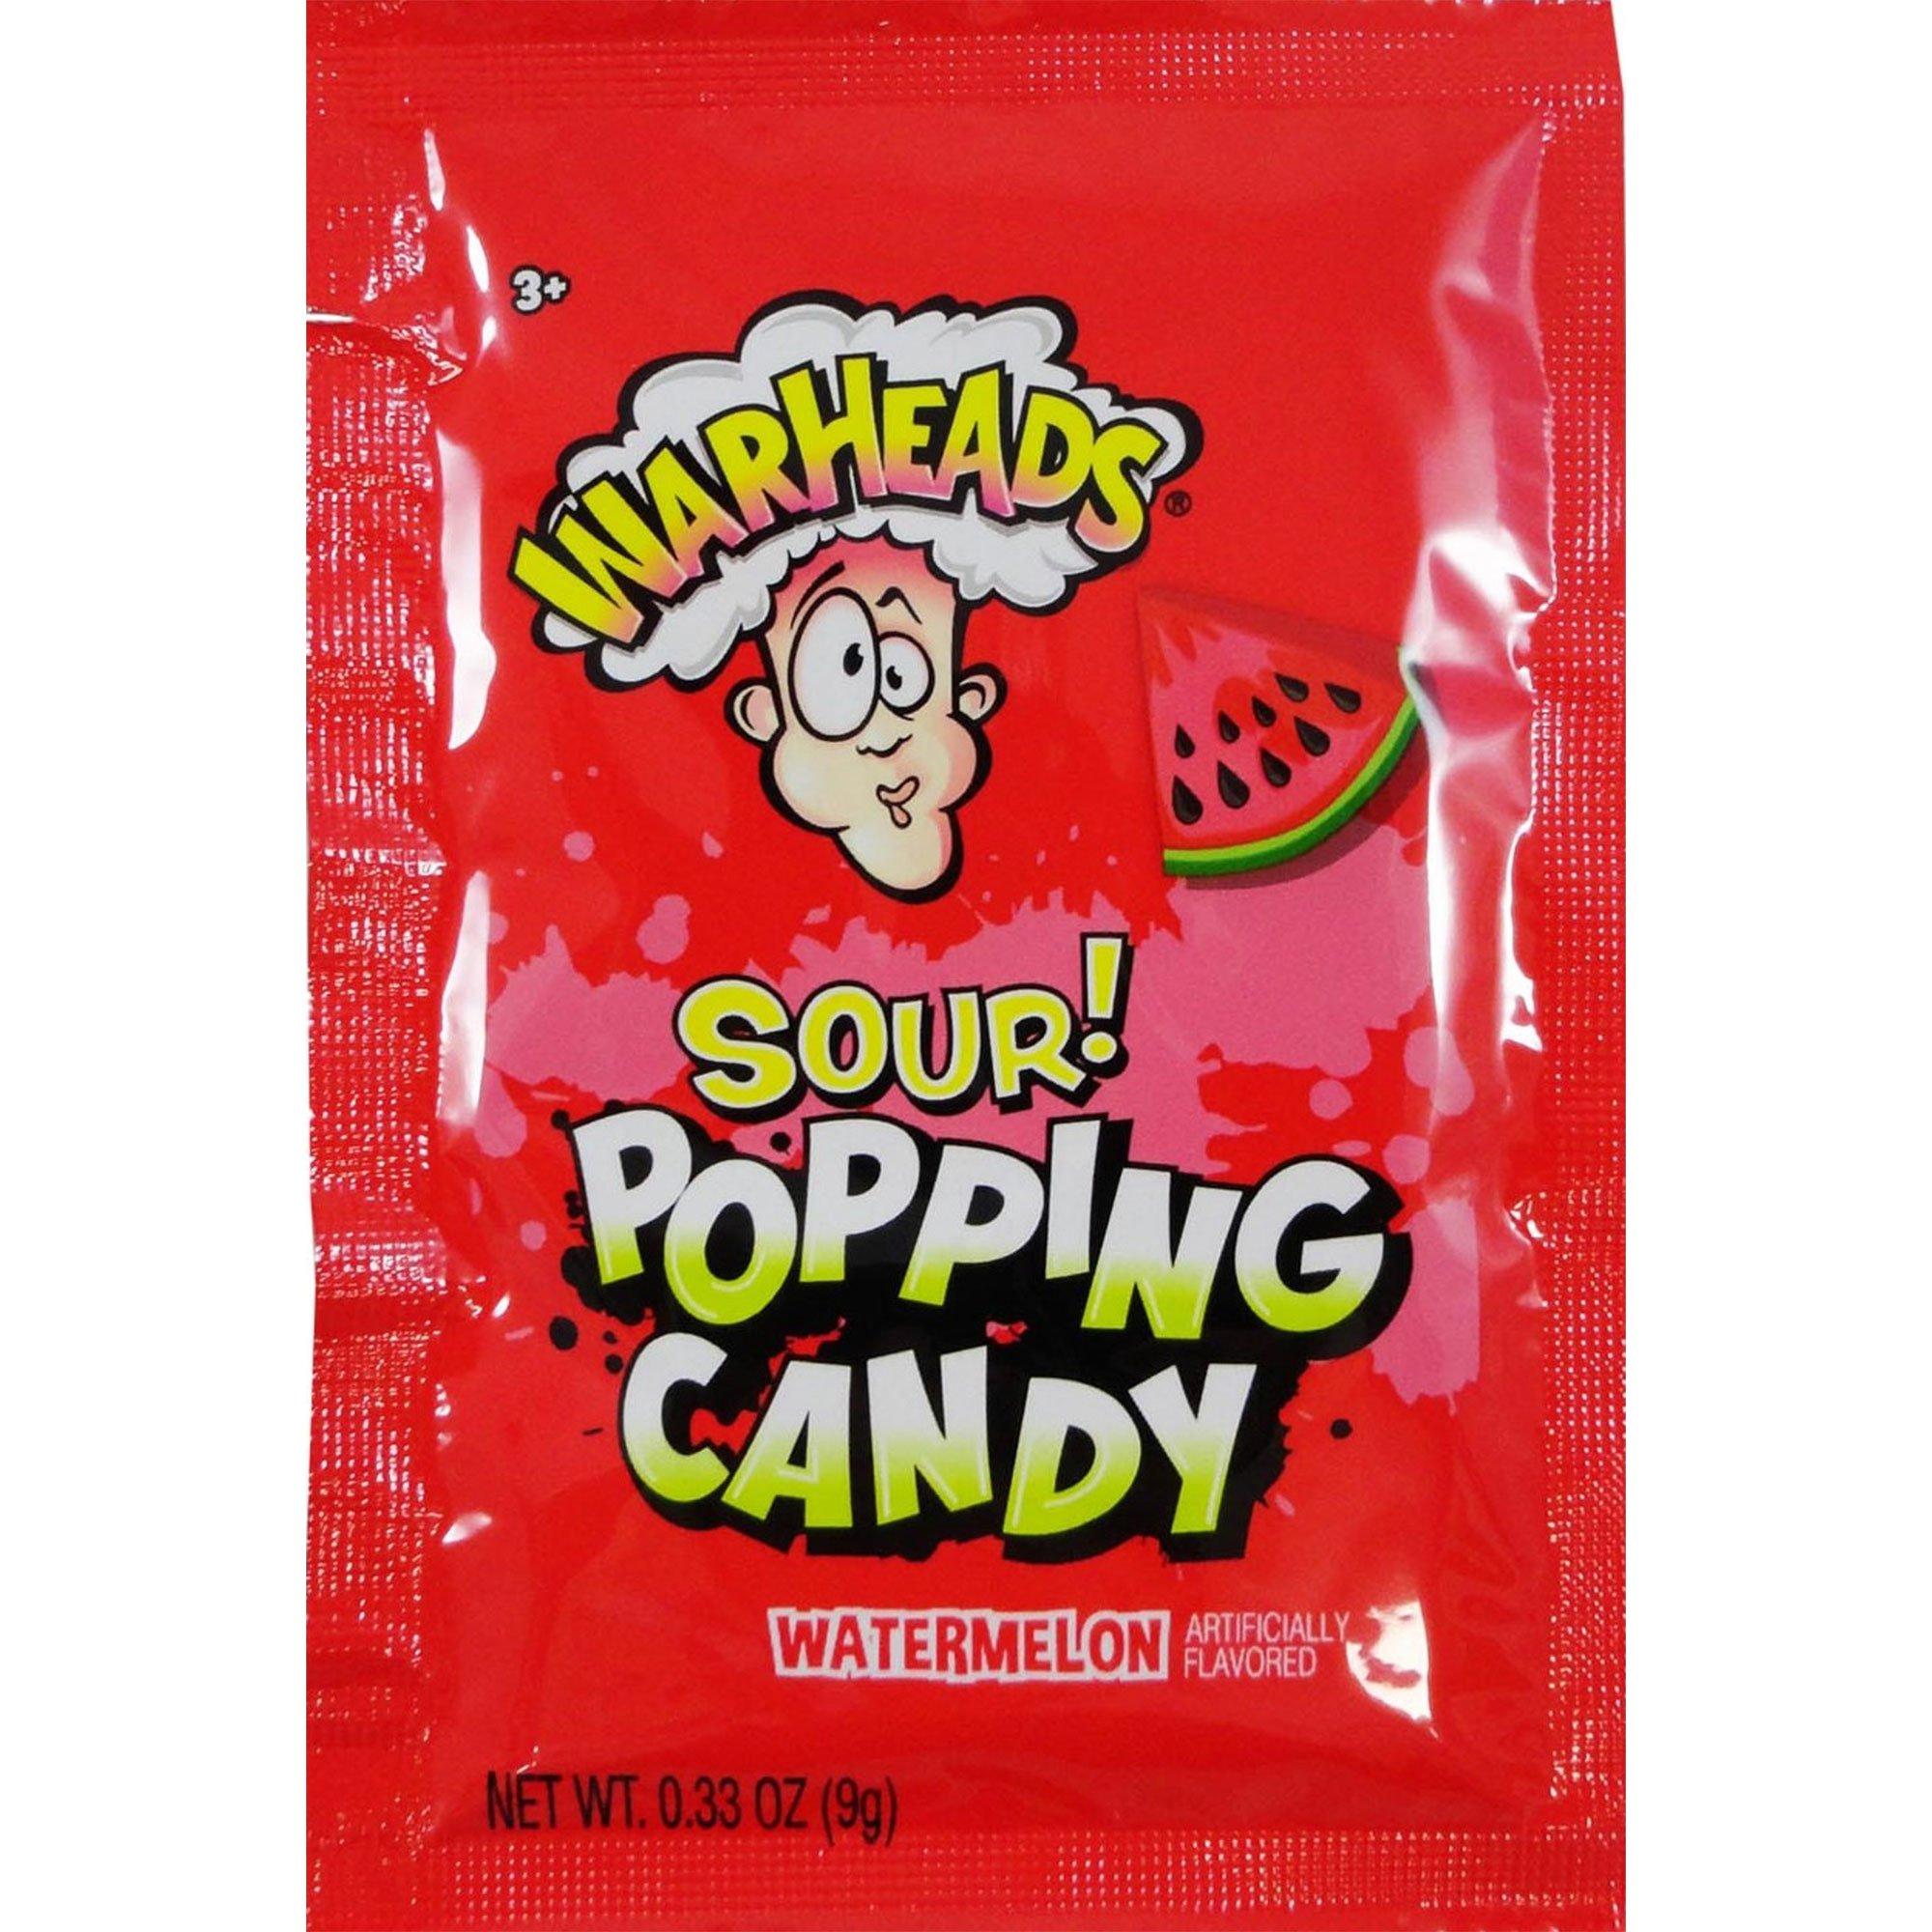 Warheads Sour Popping Candy, 0.33oz